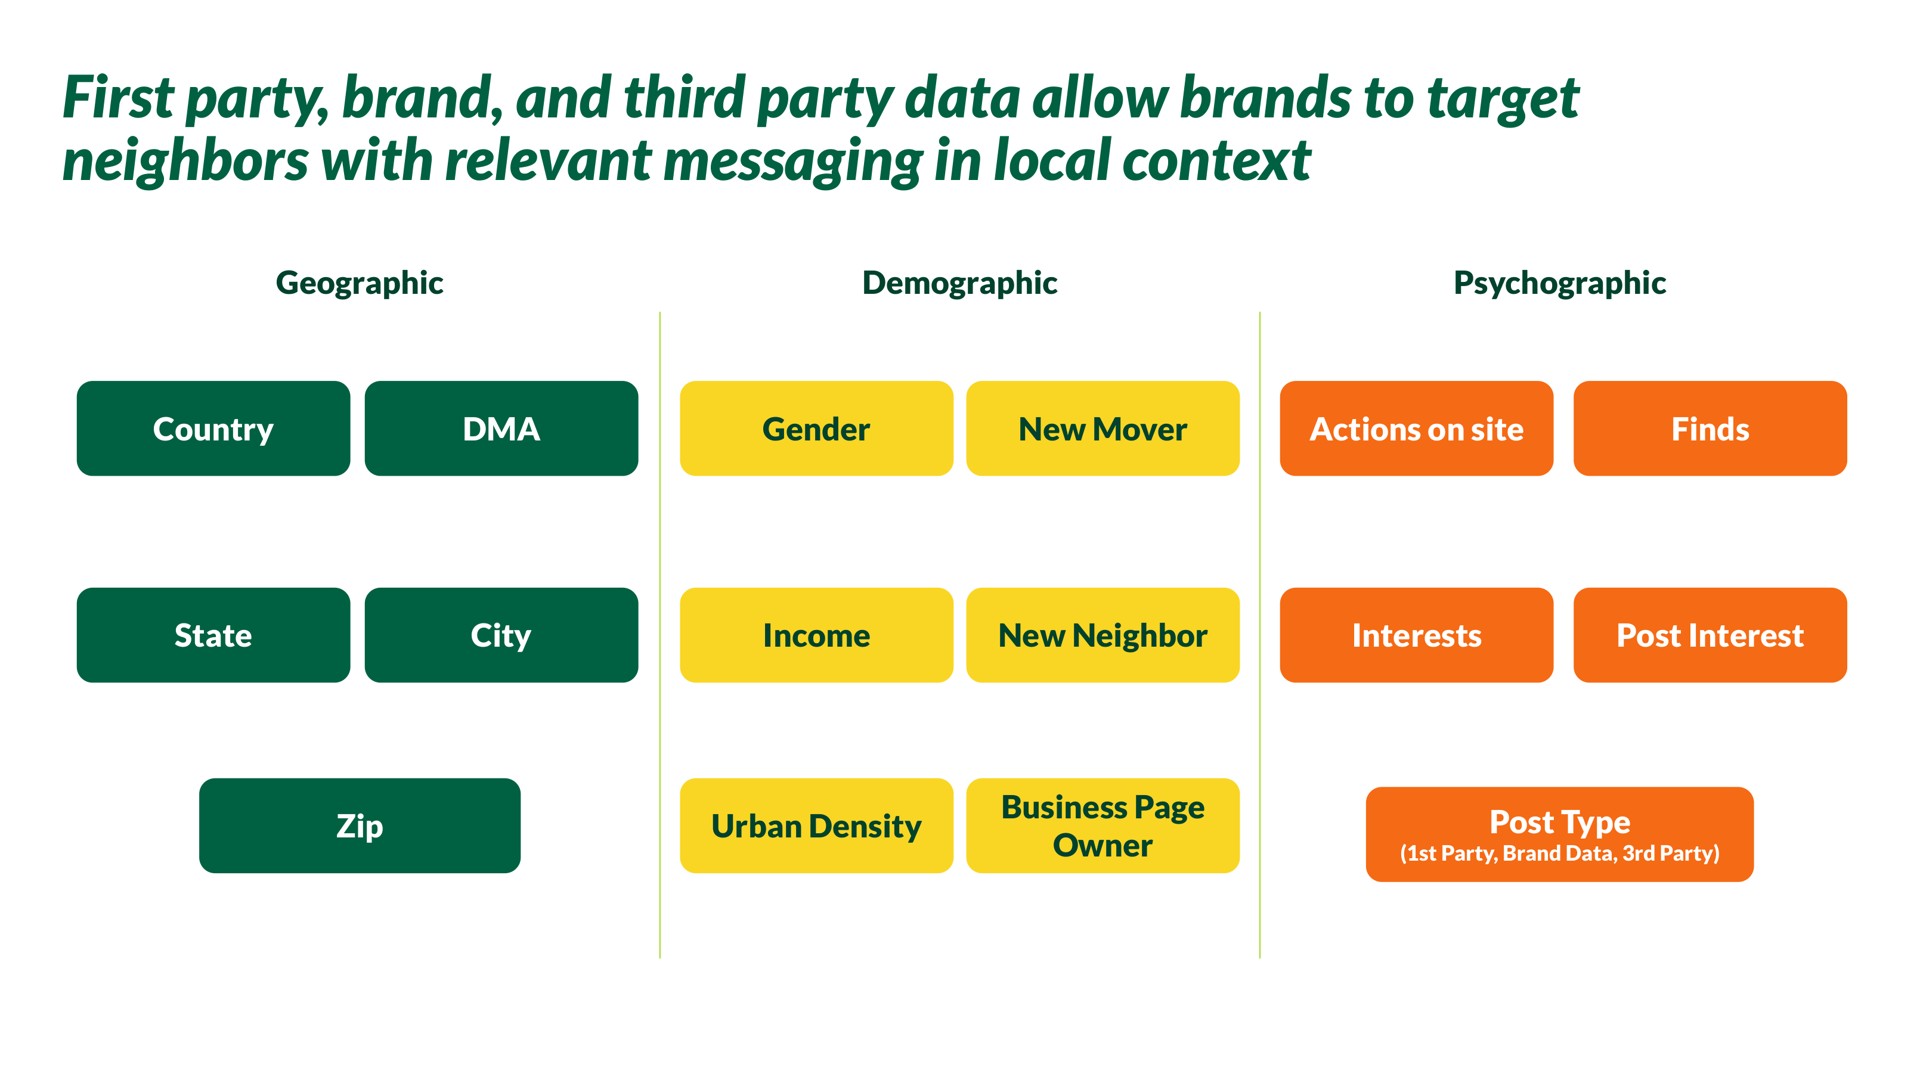 first party brand and third party data allow brands to target neighbors with relevant messaging in local context | Nextdoor